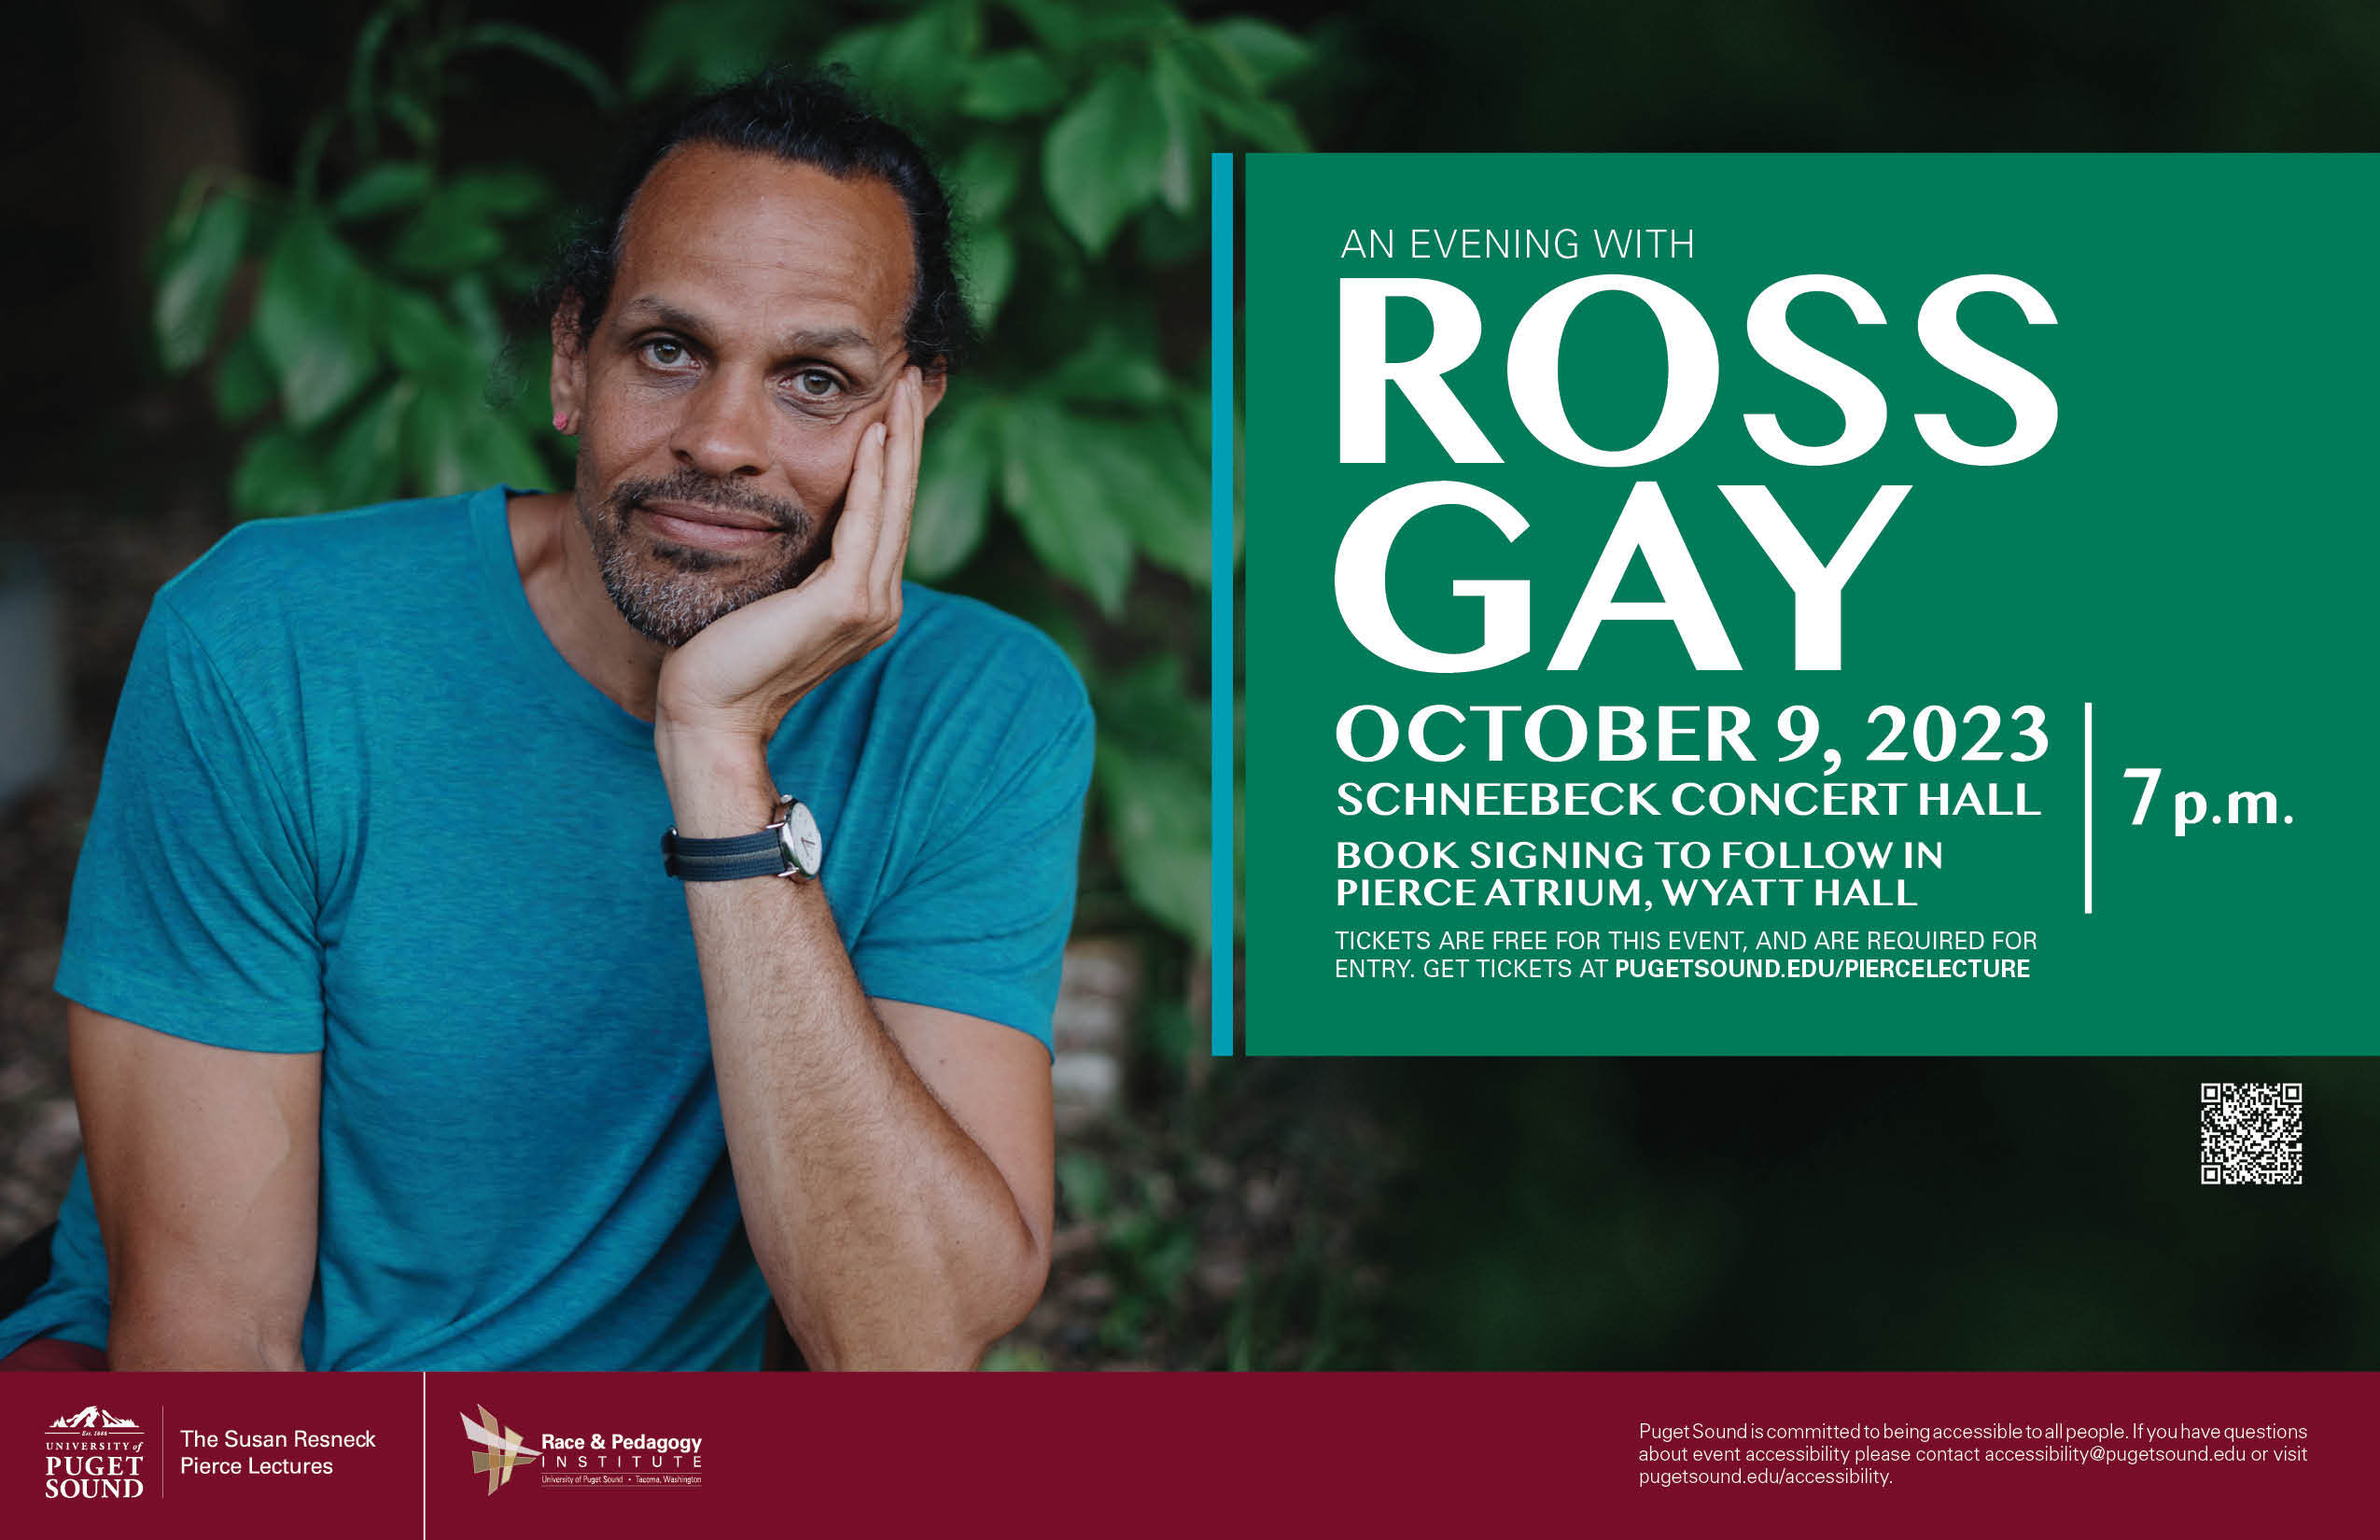 Ross Gay faces the camera with his chin resting in the palm of his left hand.